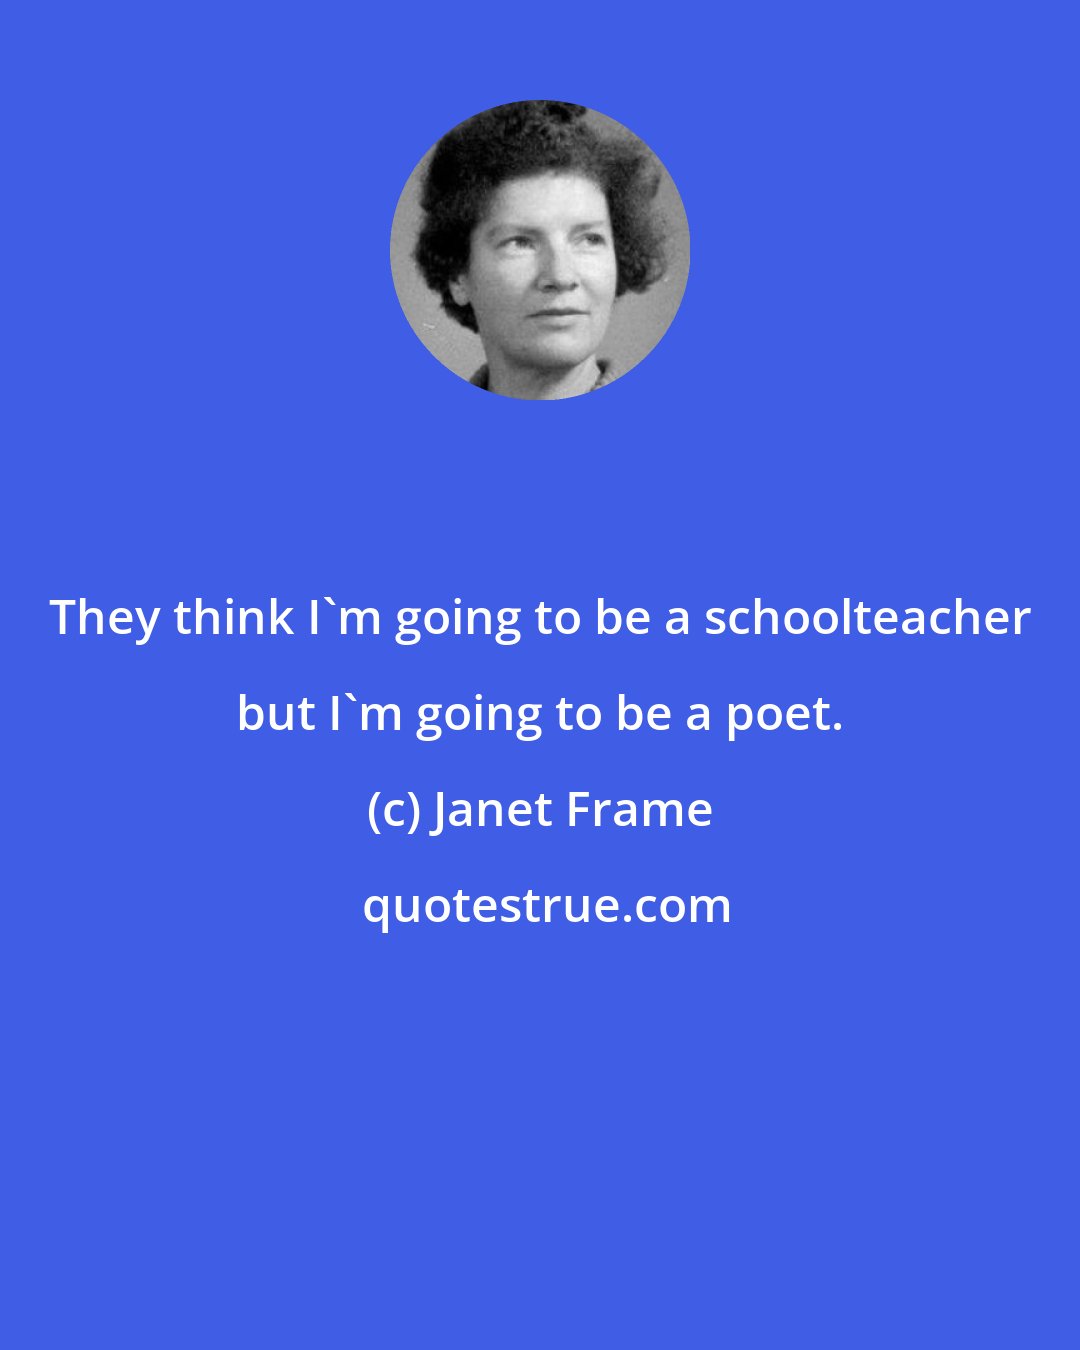 Janet Frame: They think I'm going to be a schoolteacher but I'm going to be a poet.